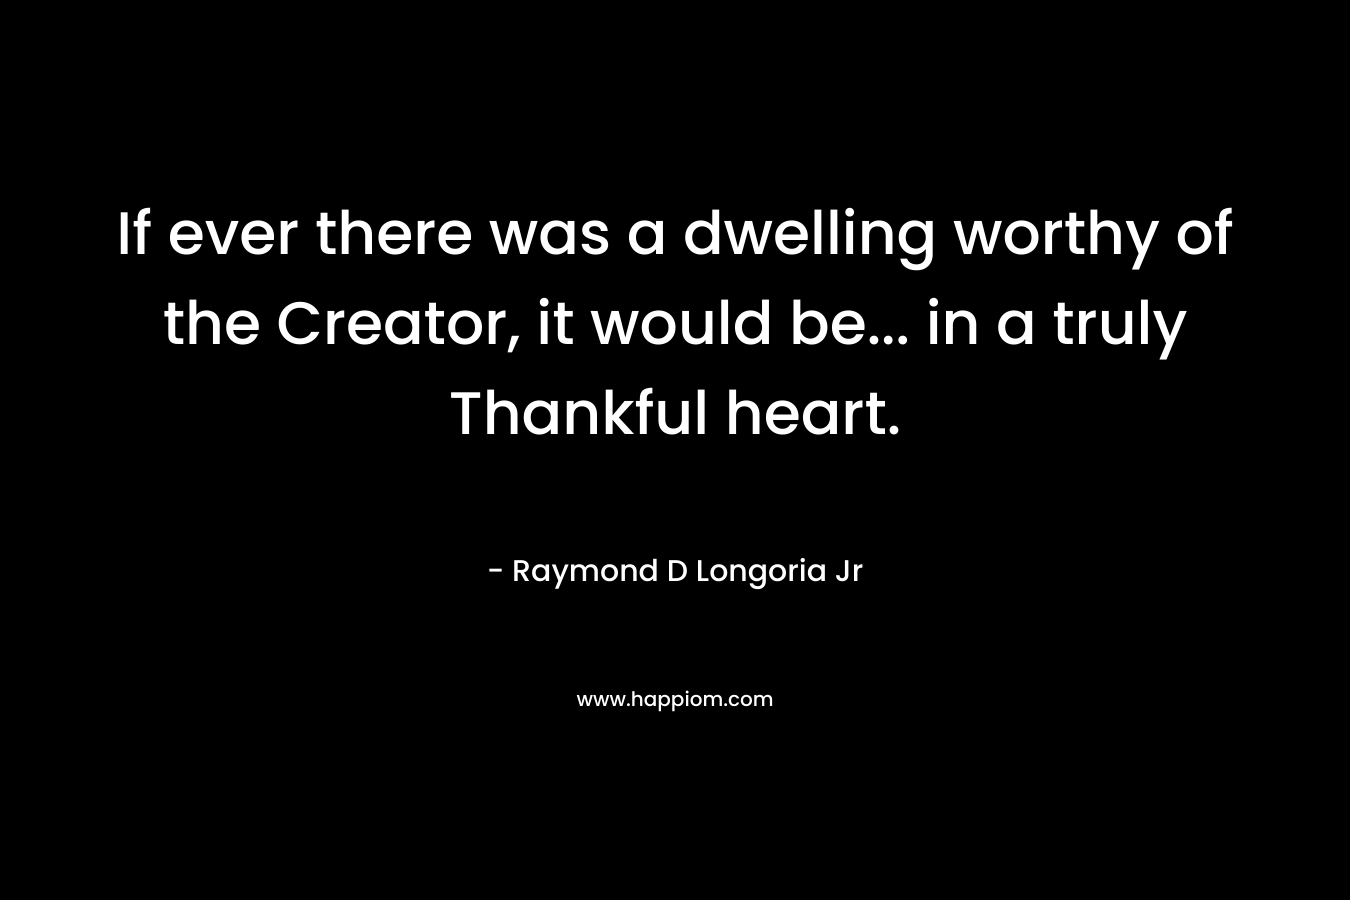 If ever there was a dwelling worthy of the Creator, it would be... in a truly Thankful heart.